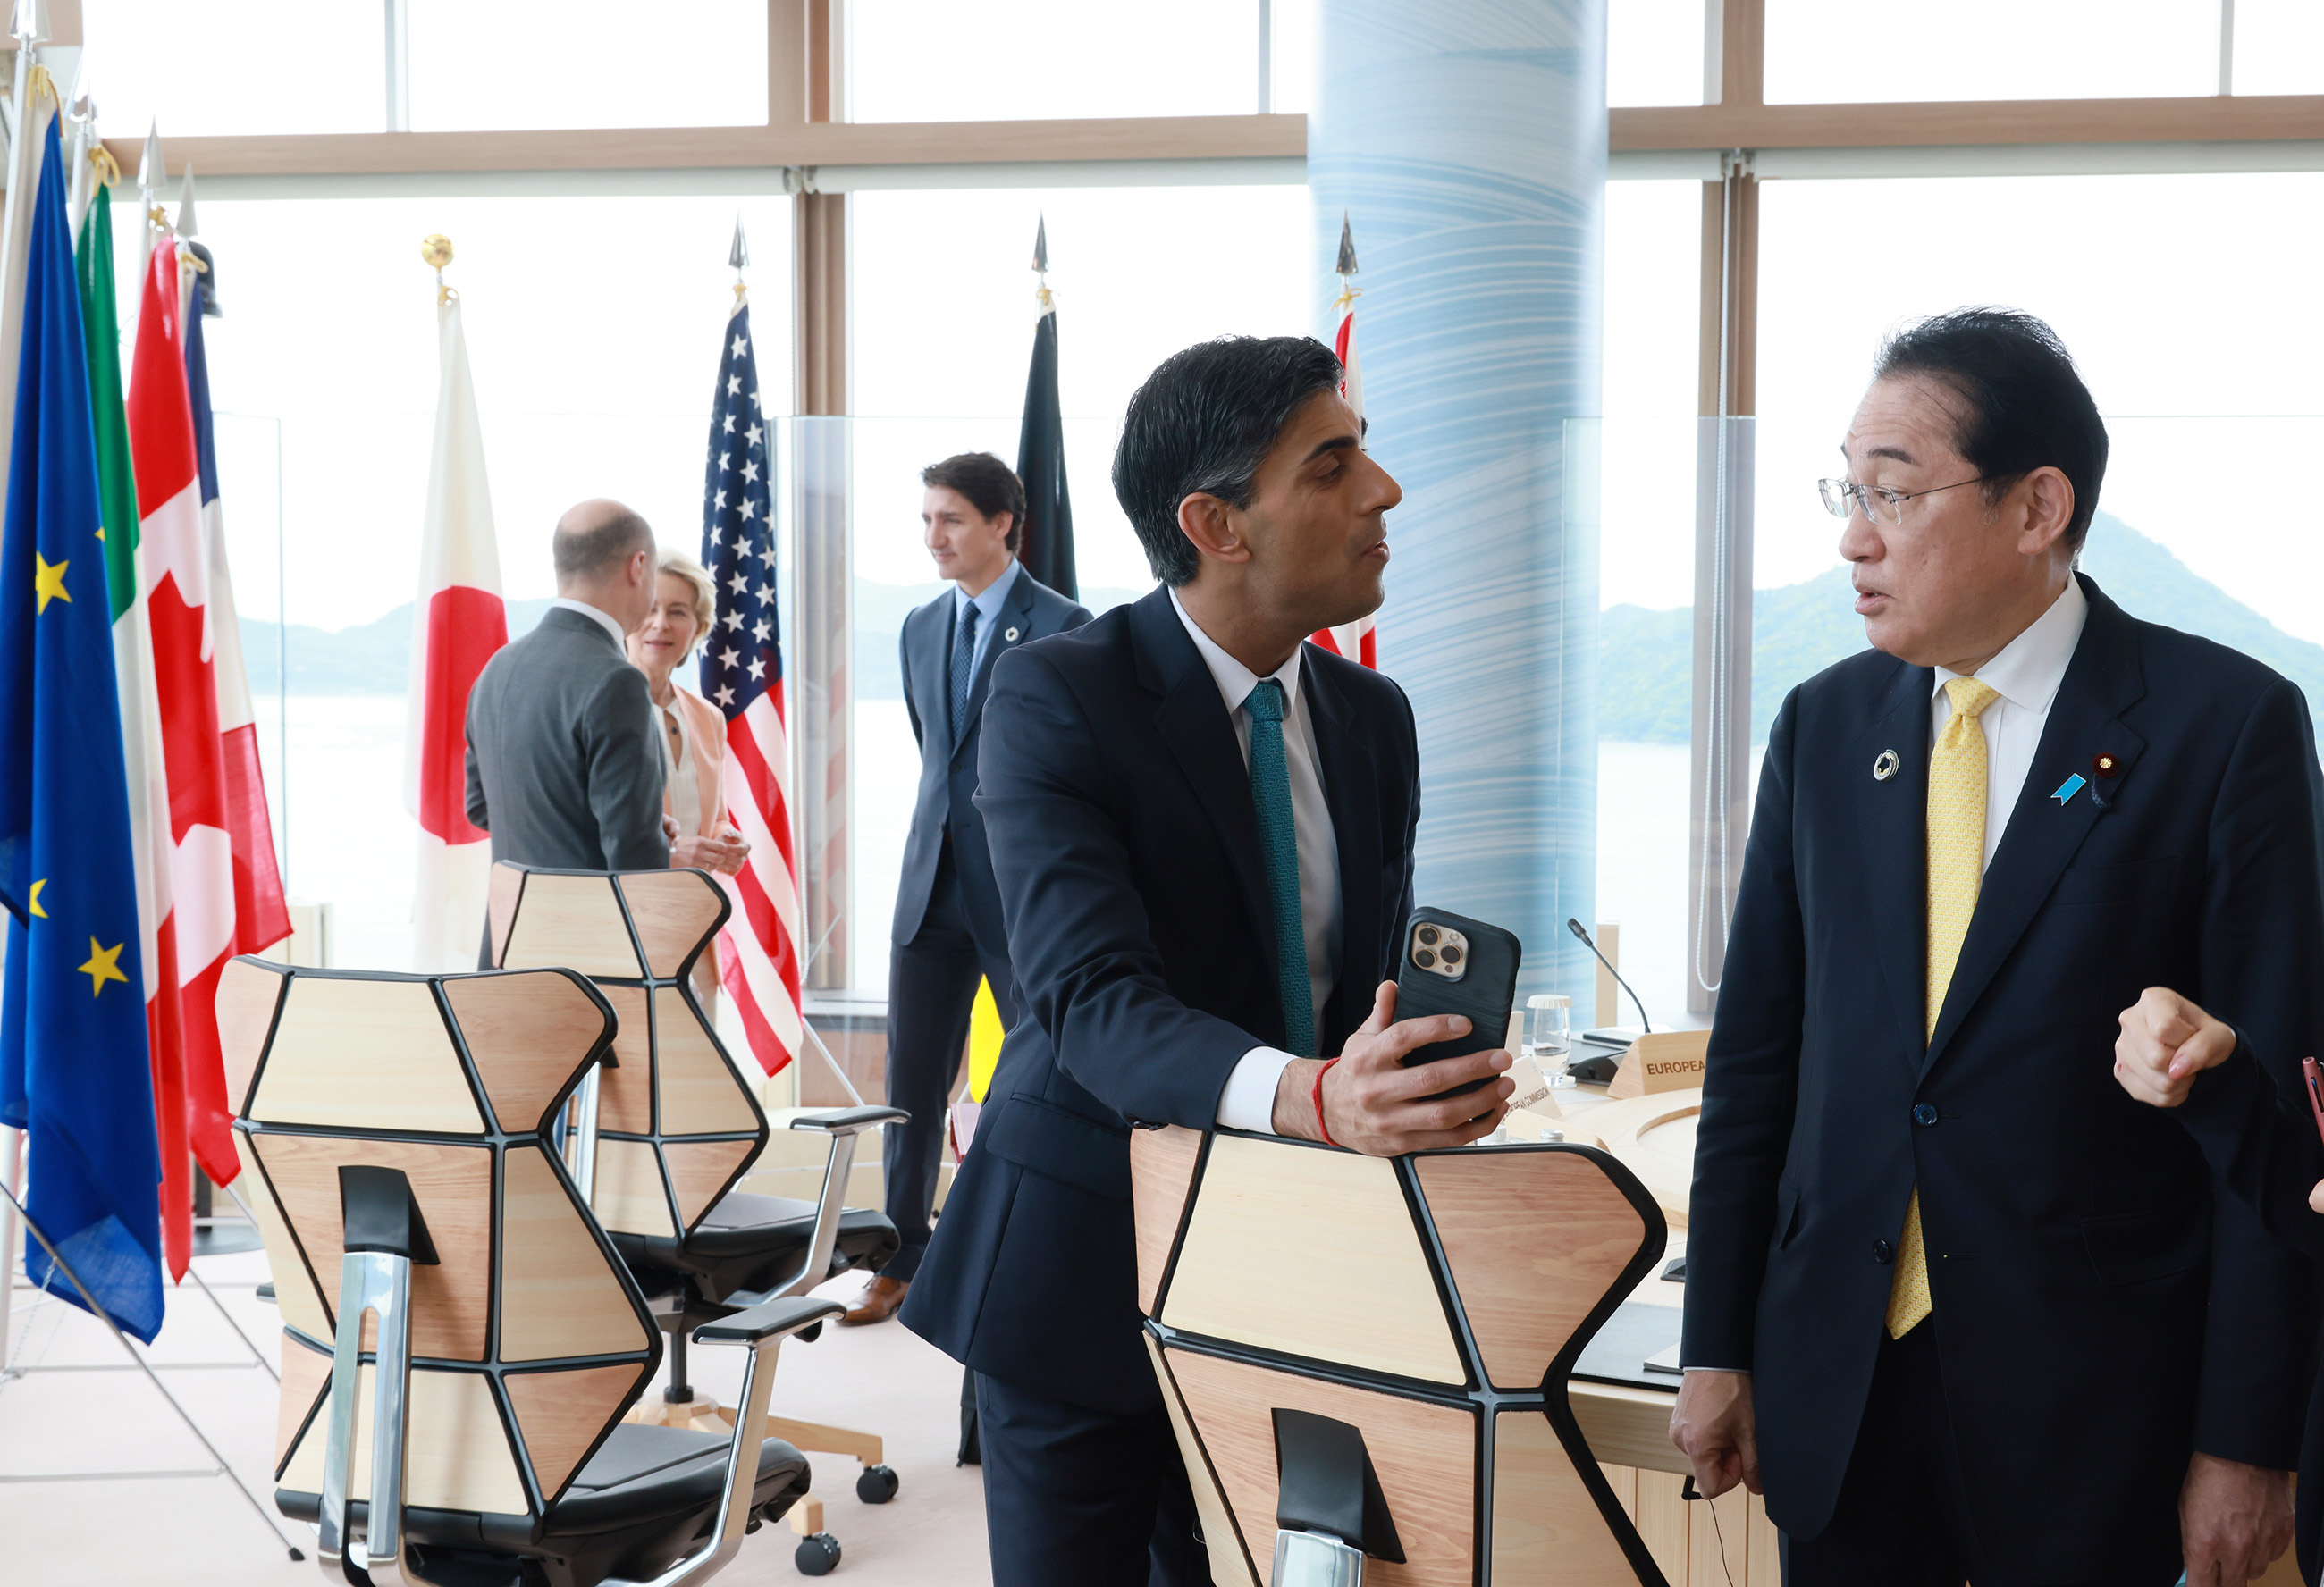 Prime Minister Kishida interacting with other leaders (2)